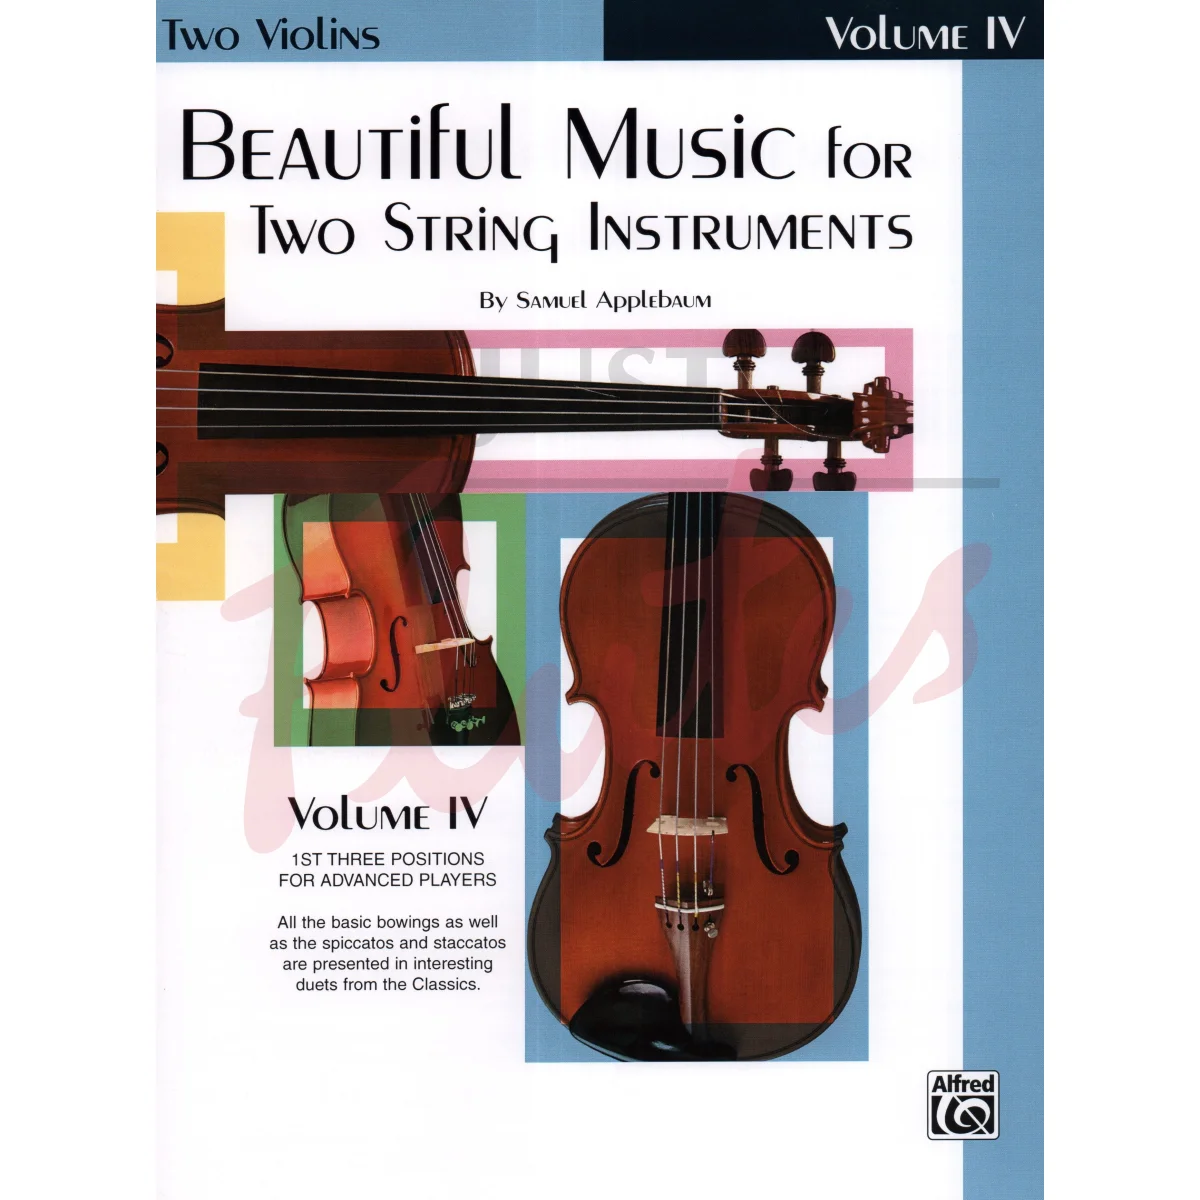 Beautiful Music for Two String Instruments Vol 4 [Violin]